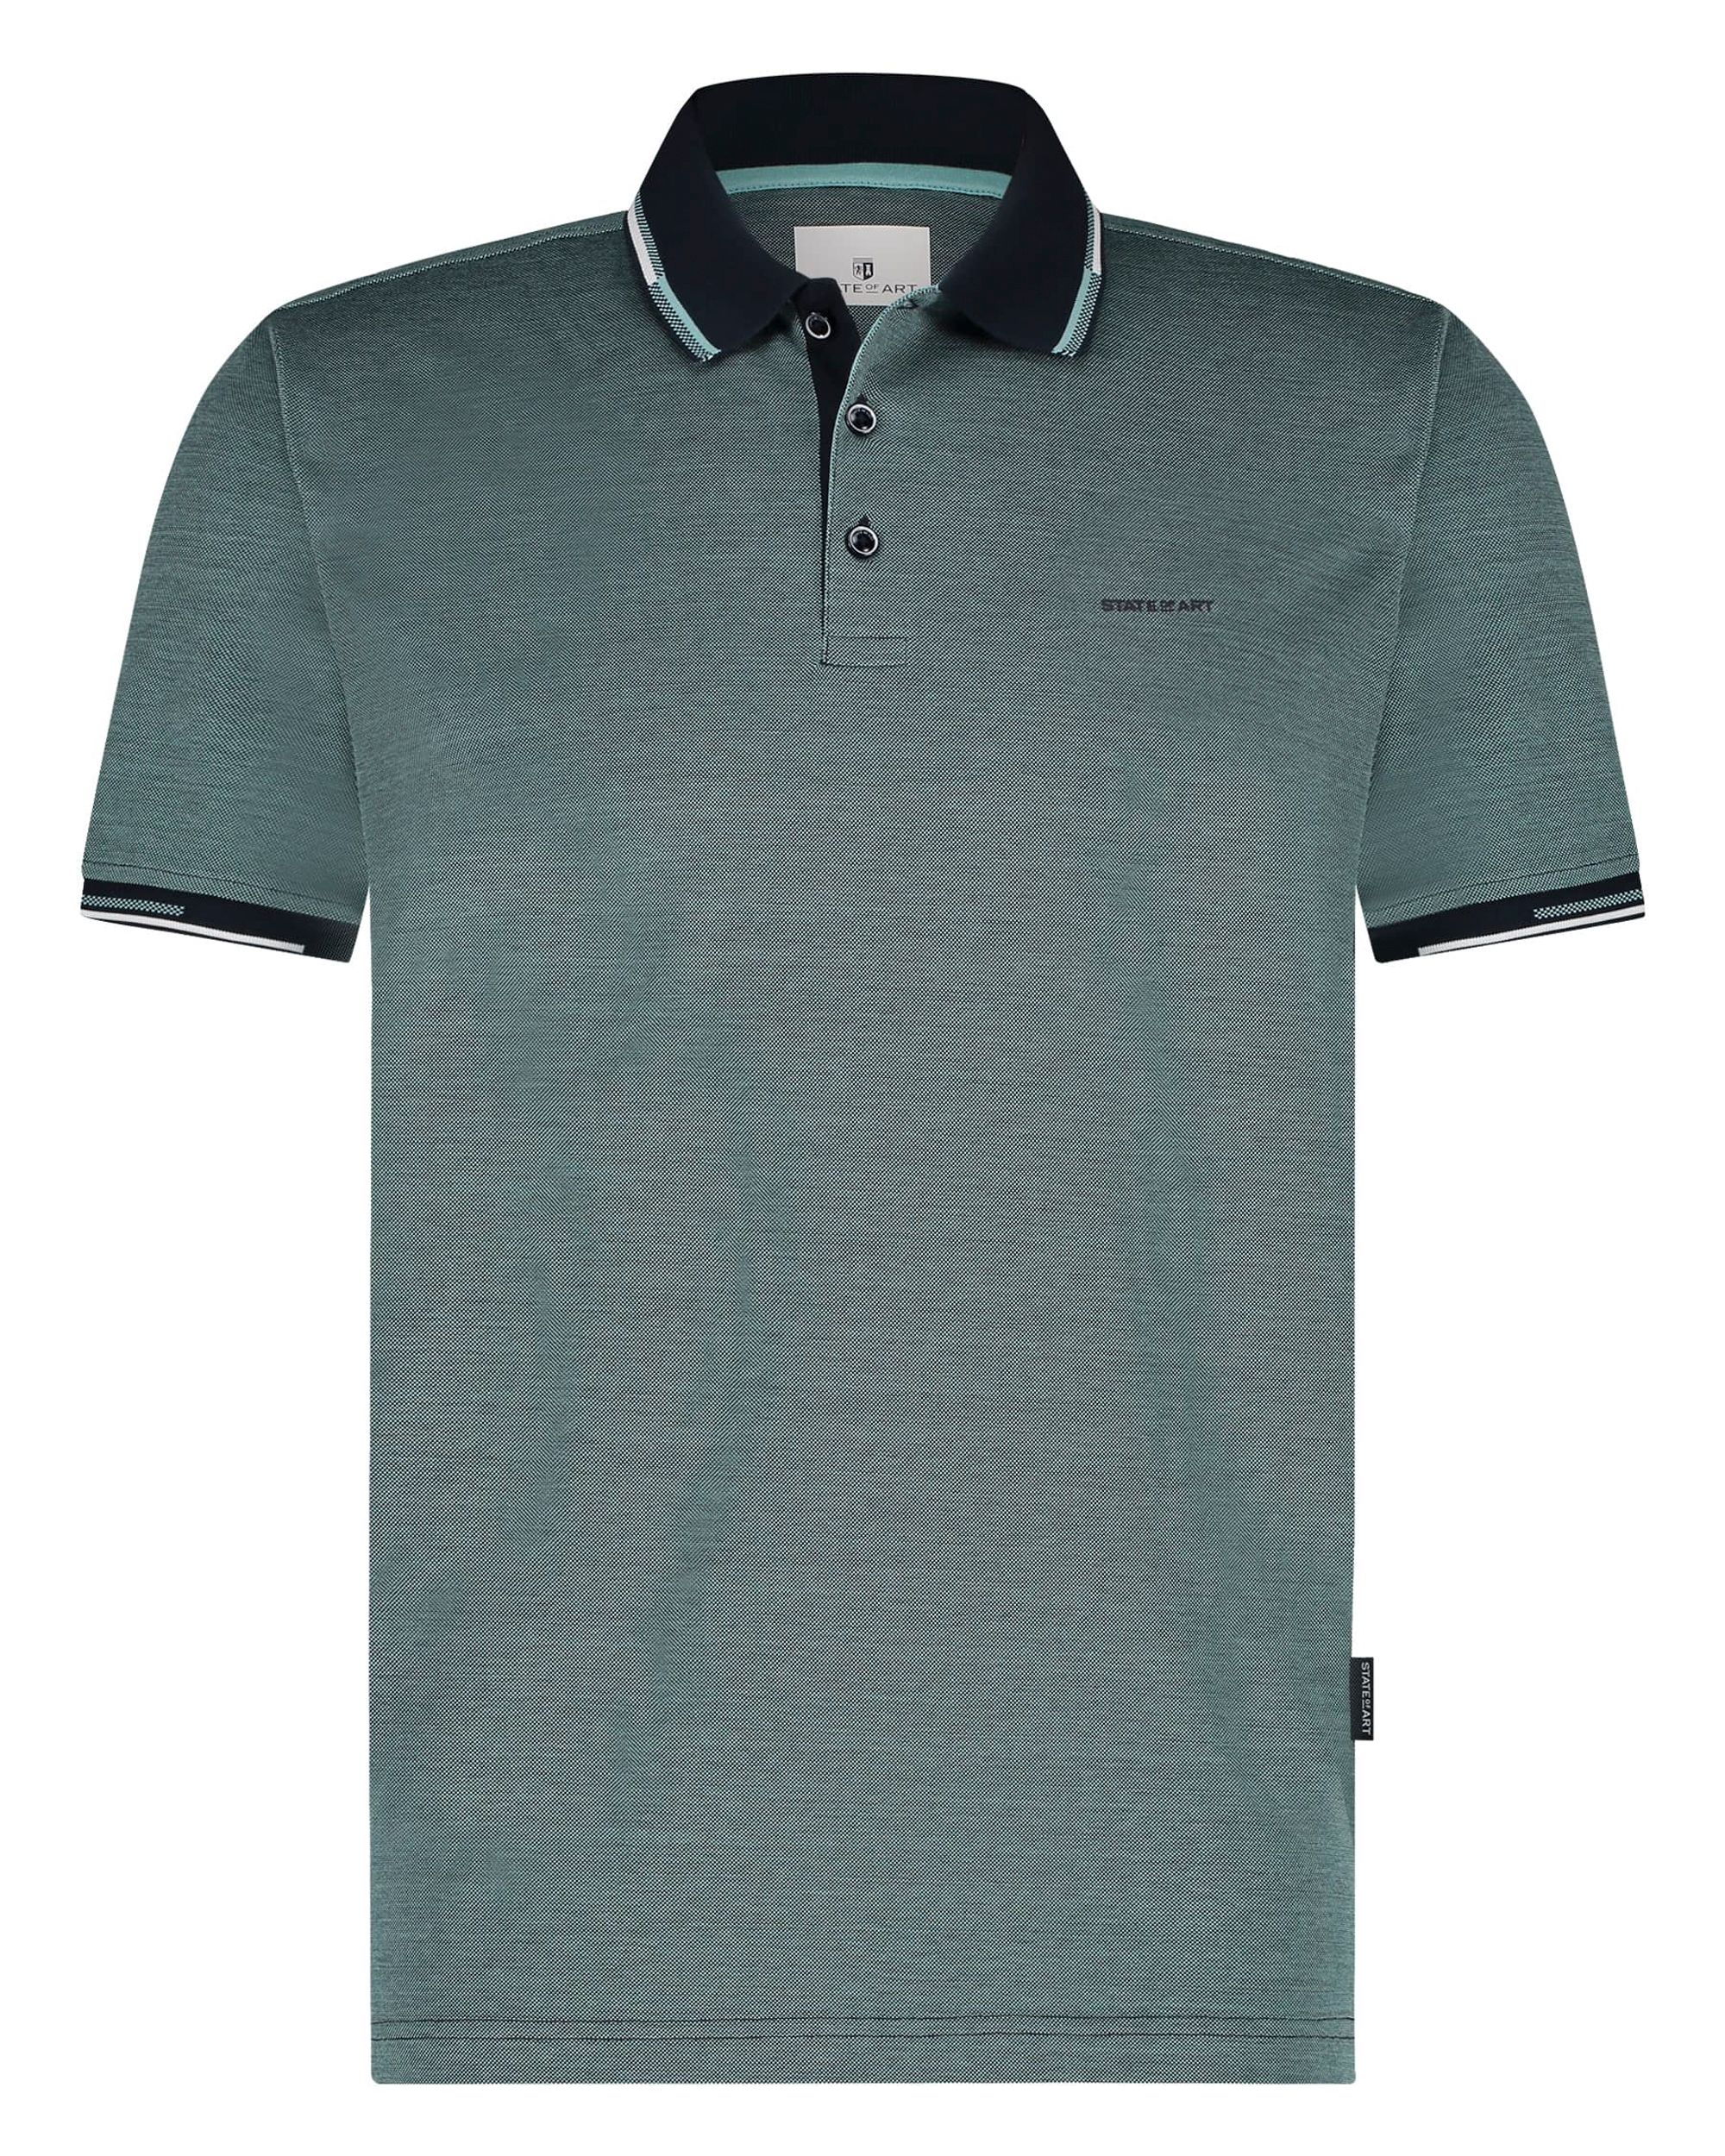 State of Art Polo KM Donker blauw 093393-001-4XL